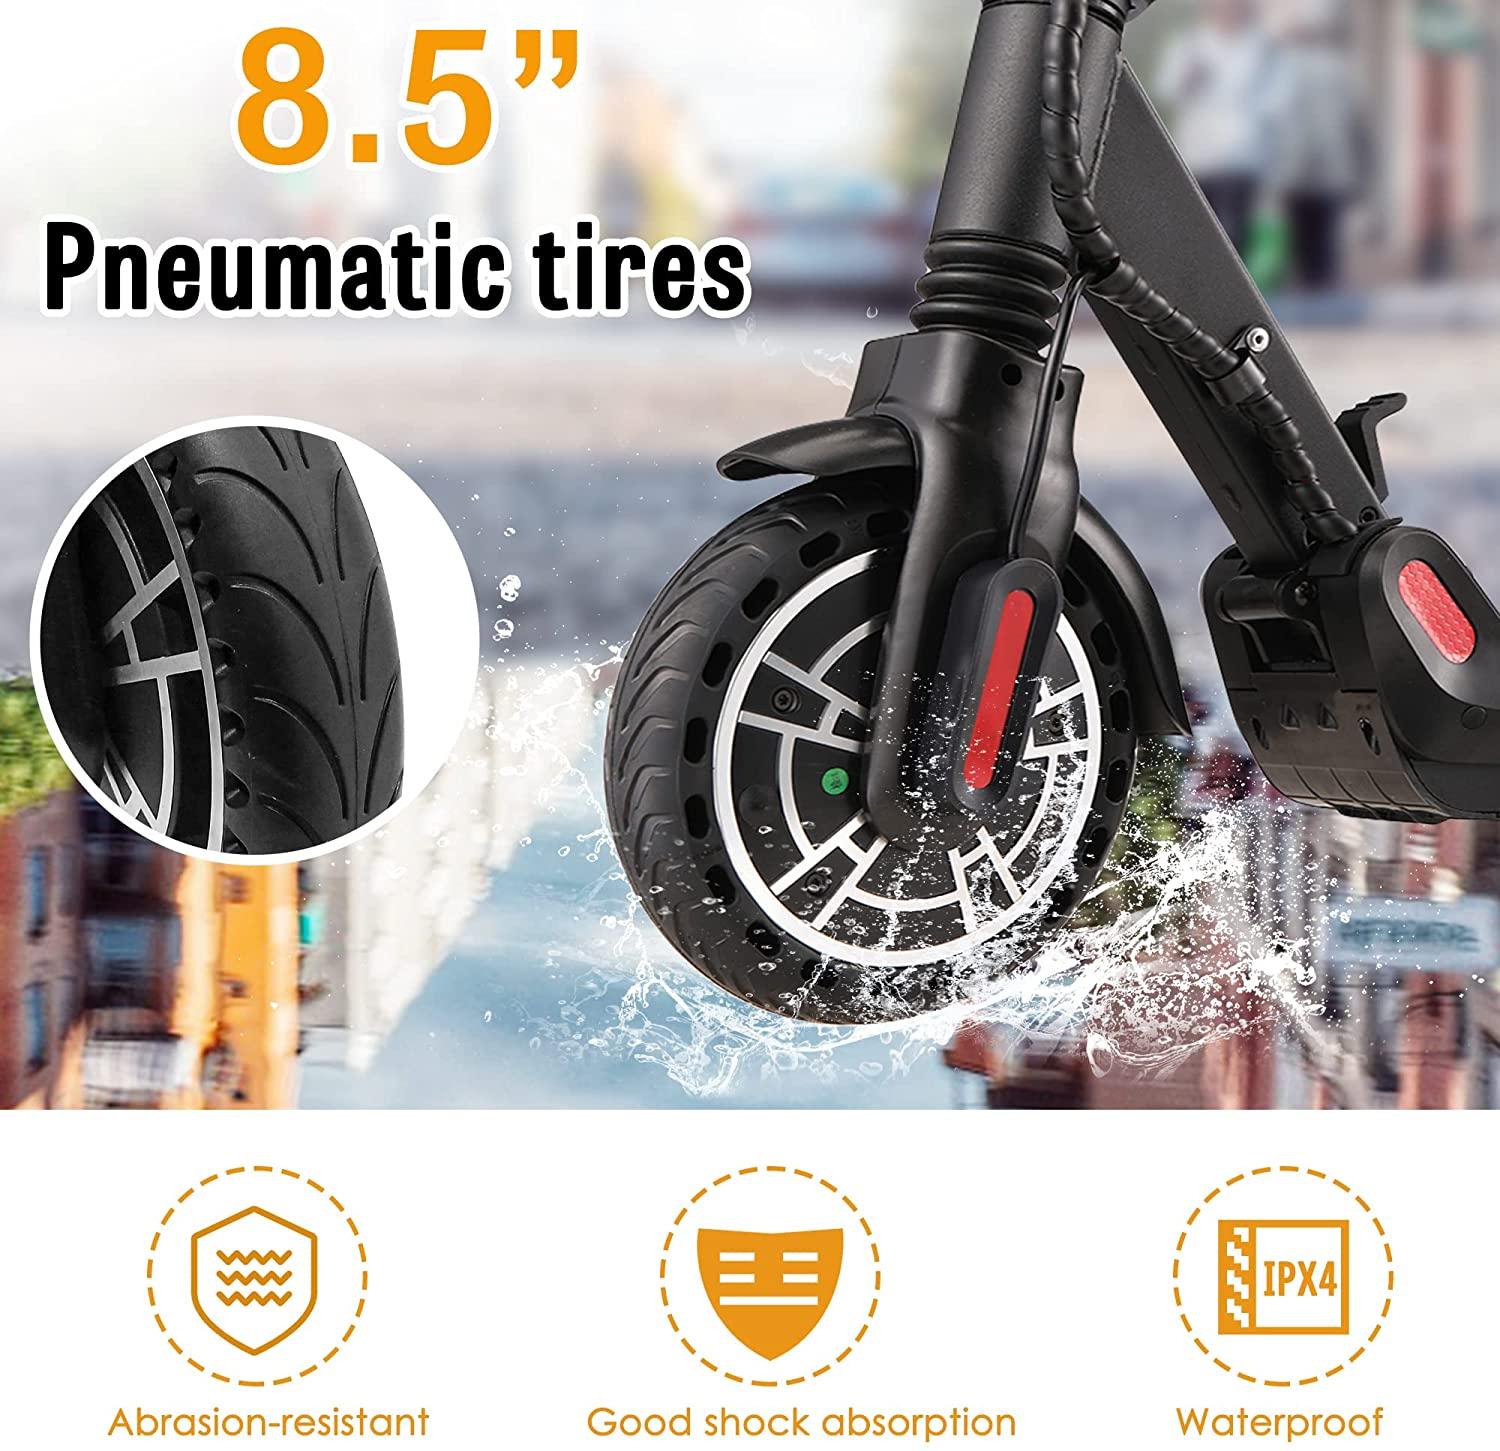 Electric Scooter for Adults LED Display Headlight 350W Motor /19 MPH 3 Level Adjustable Speeds, Black - Bosonshop